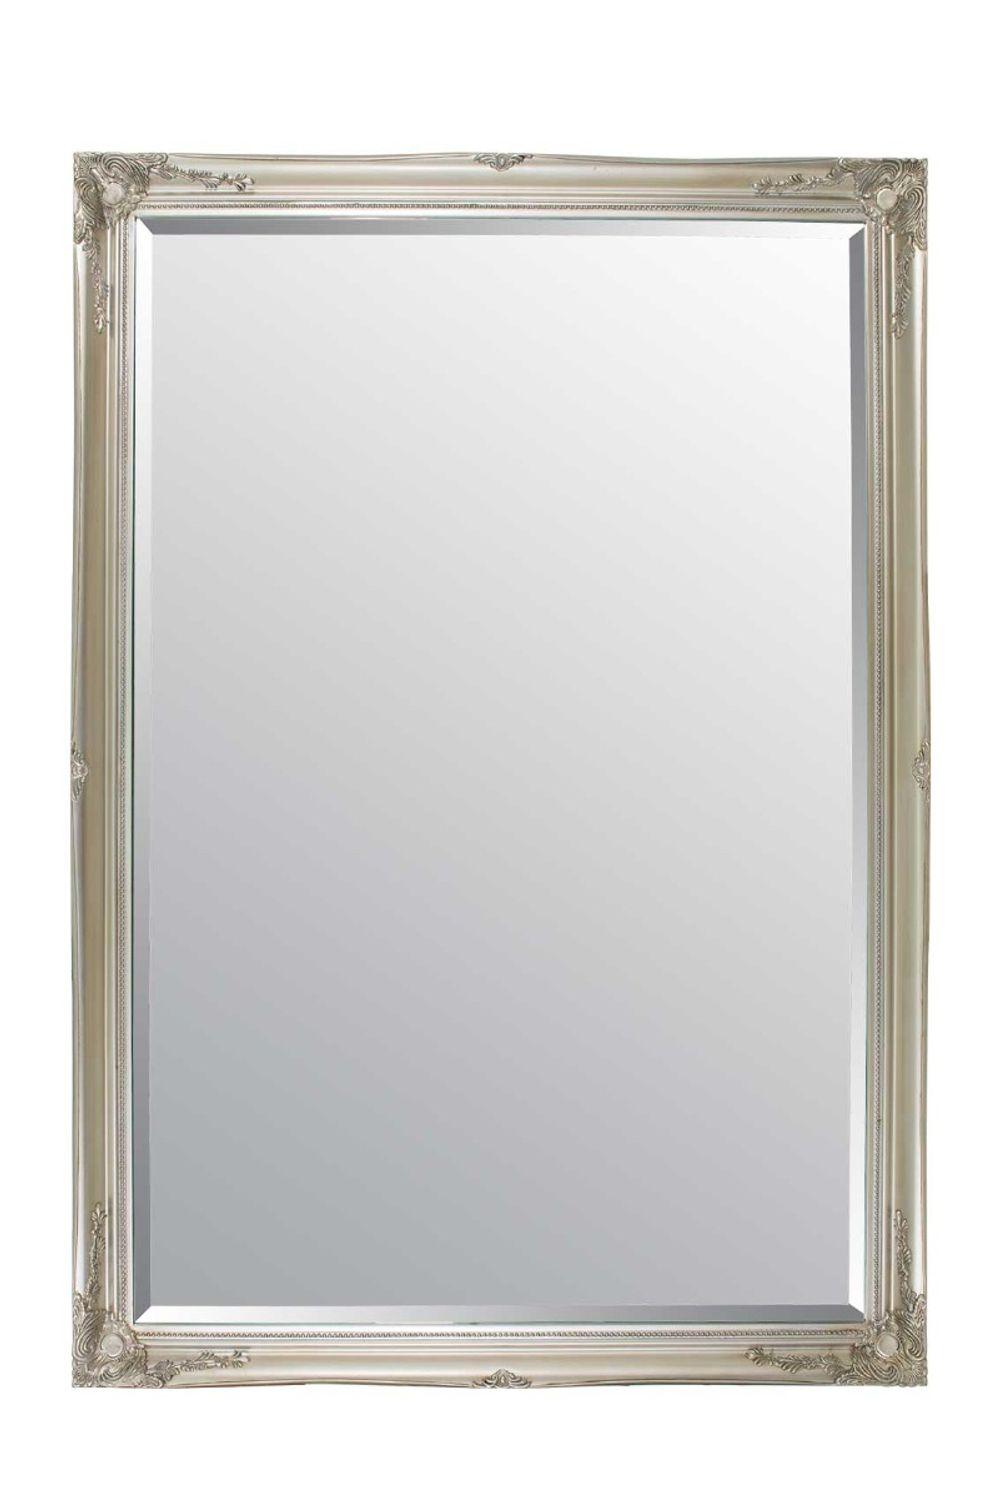 BUXTON EXTRA LARGE LEANER MIRROR 201 X 140CM - Lilpins Essentials